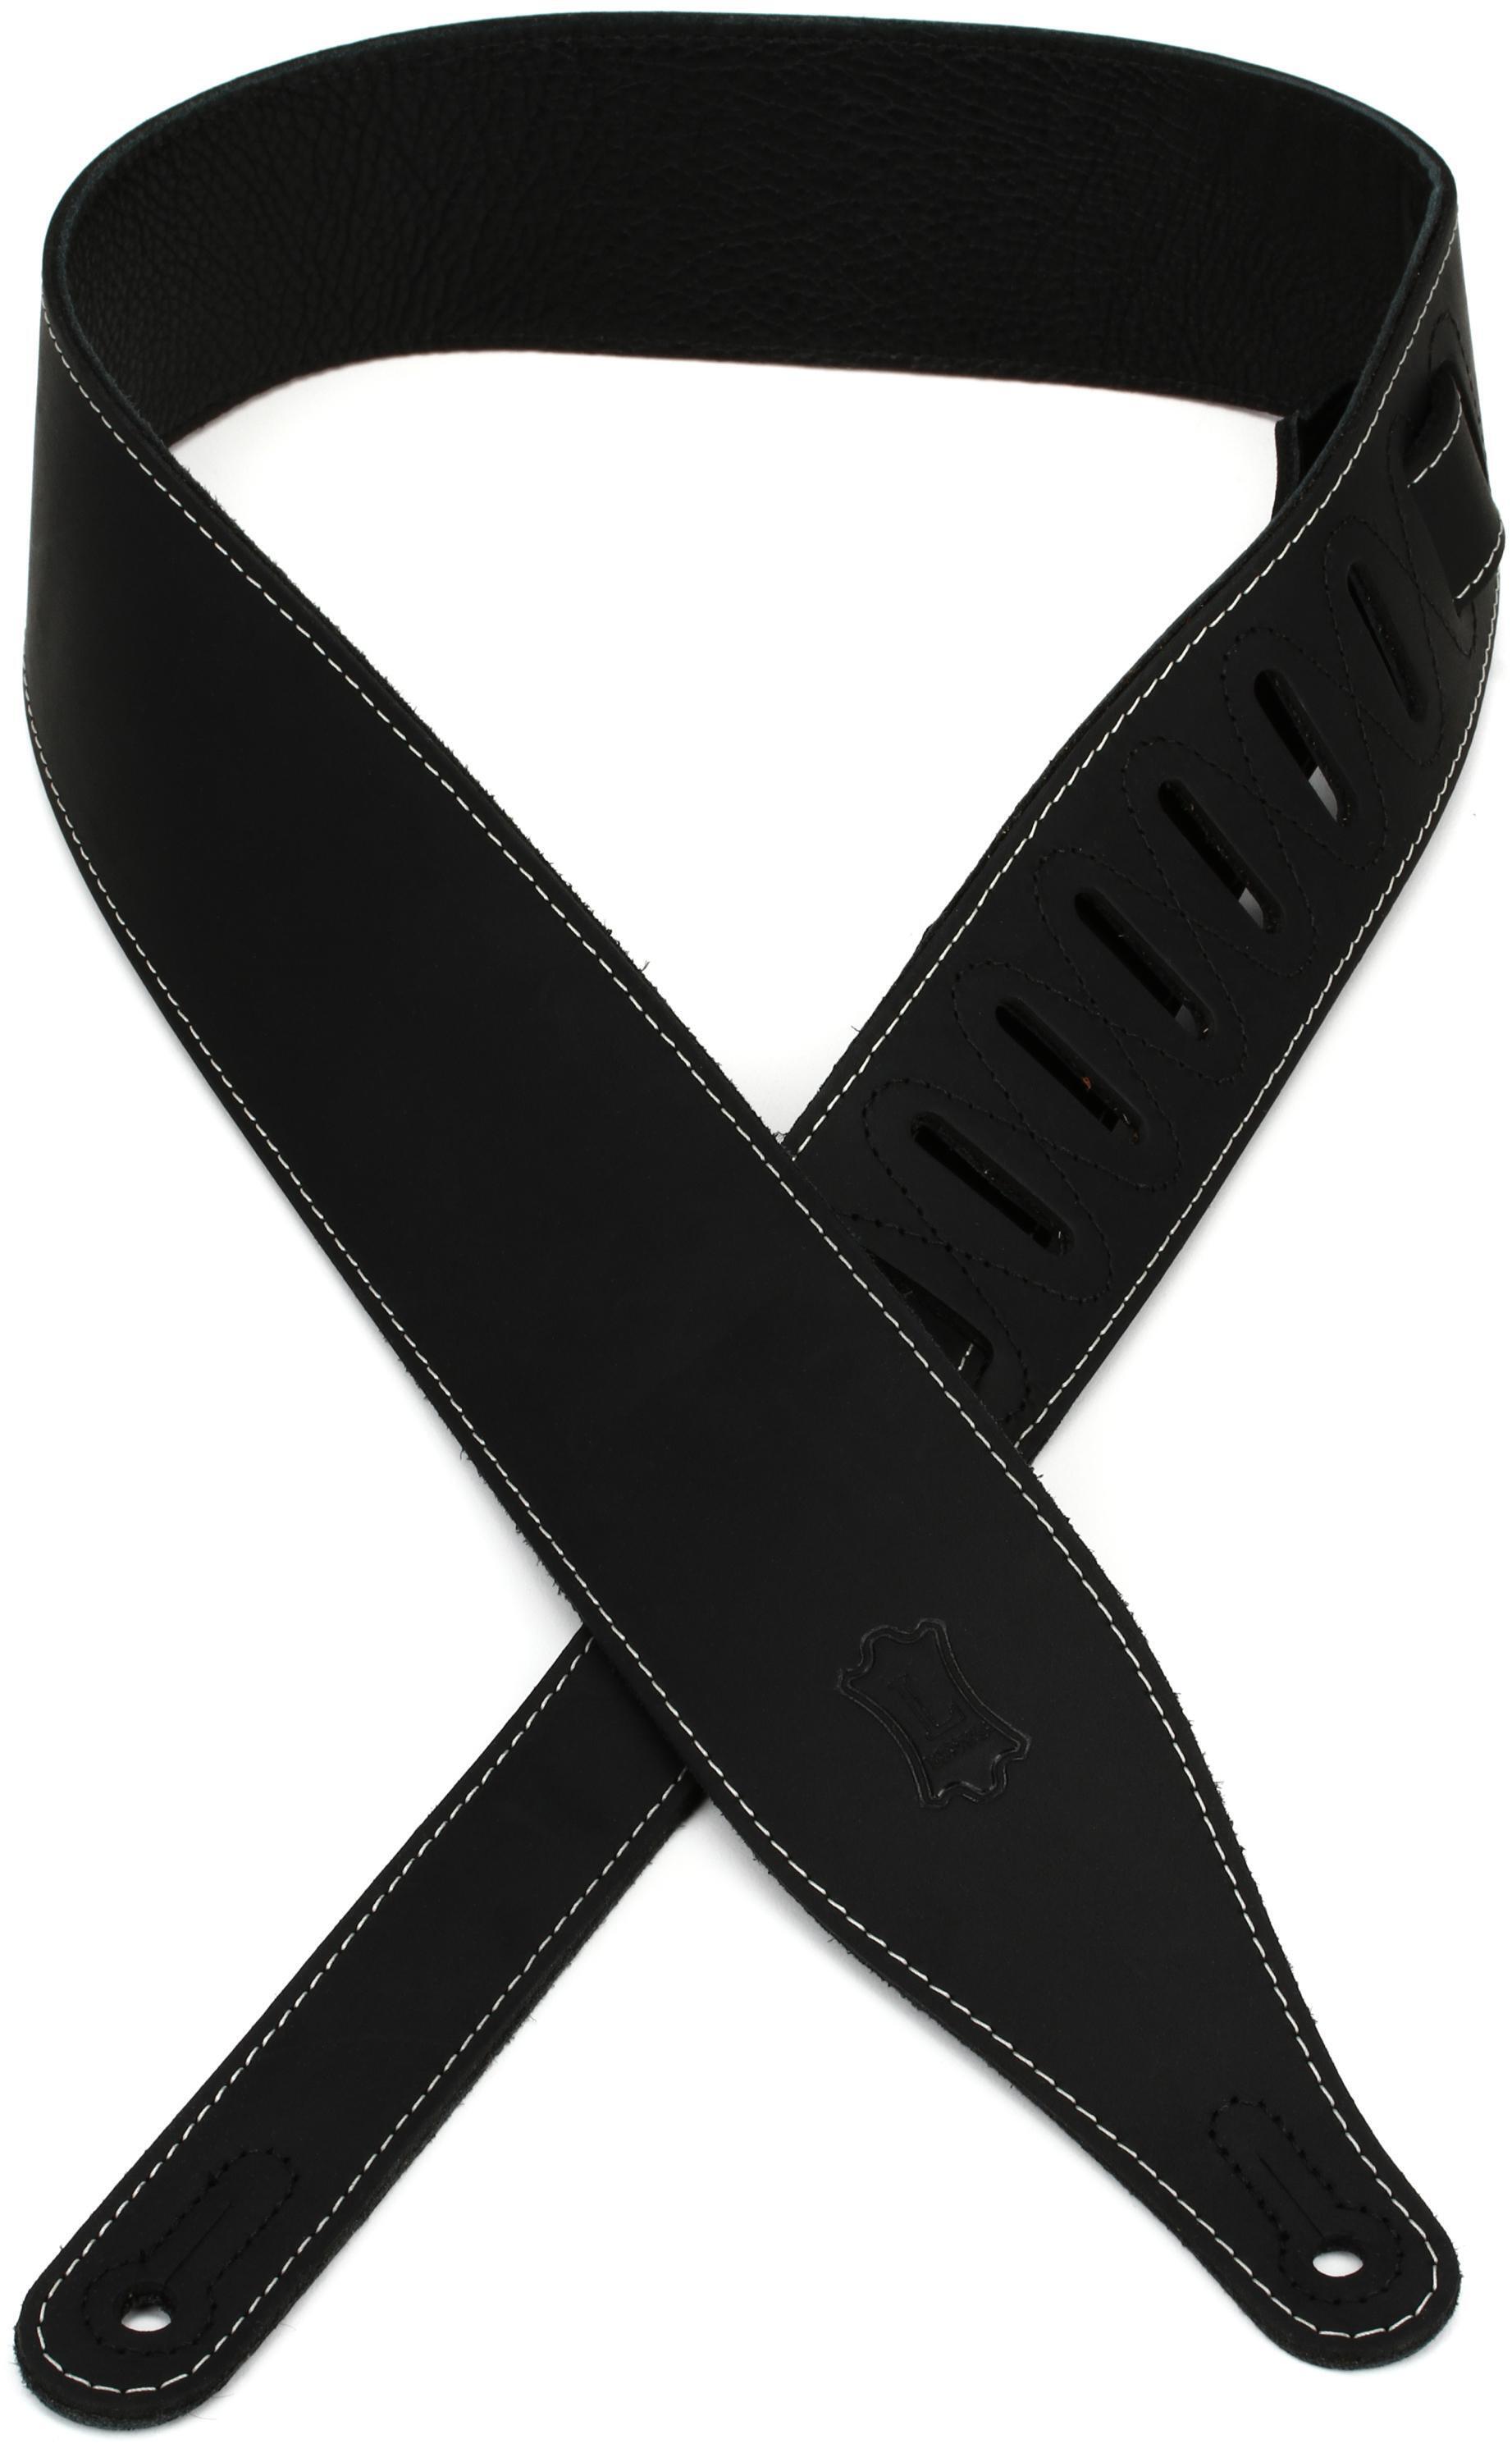 Bundled Item: Levy's M17BSS-BLK 2.5" Wide Pull-Up Butter Leather Guitar Strap - Black Sweetwater Exclusive